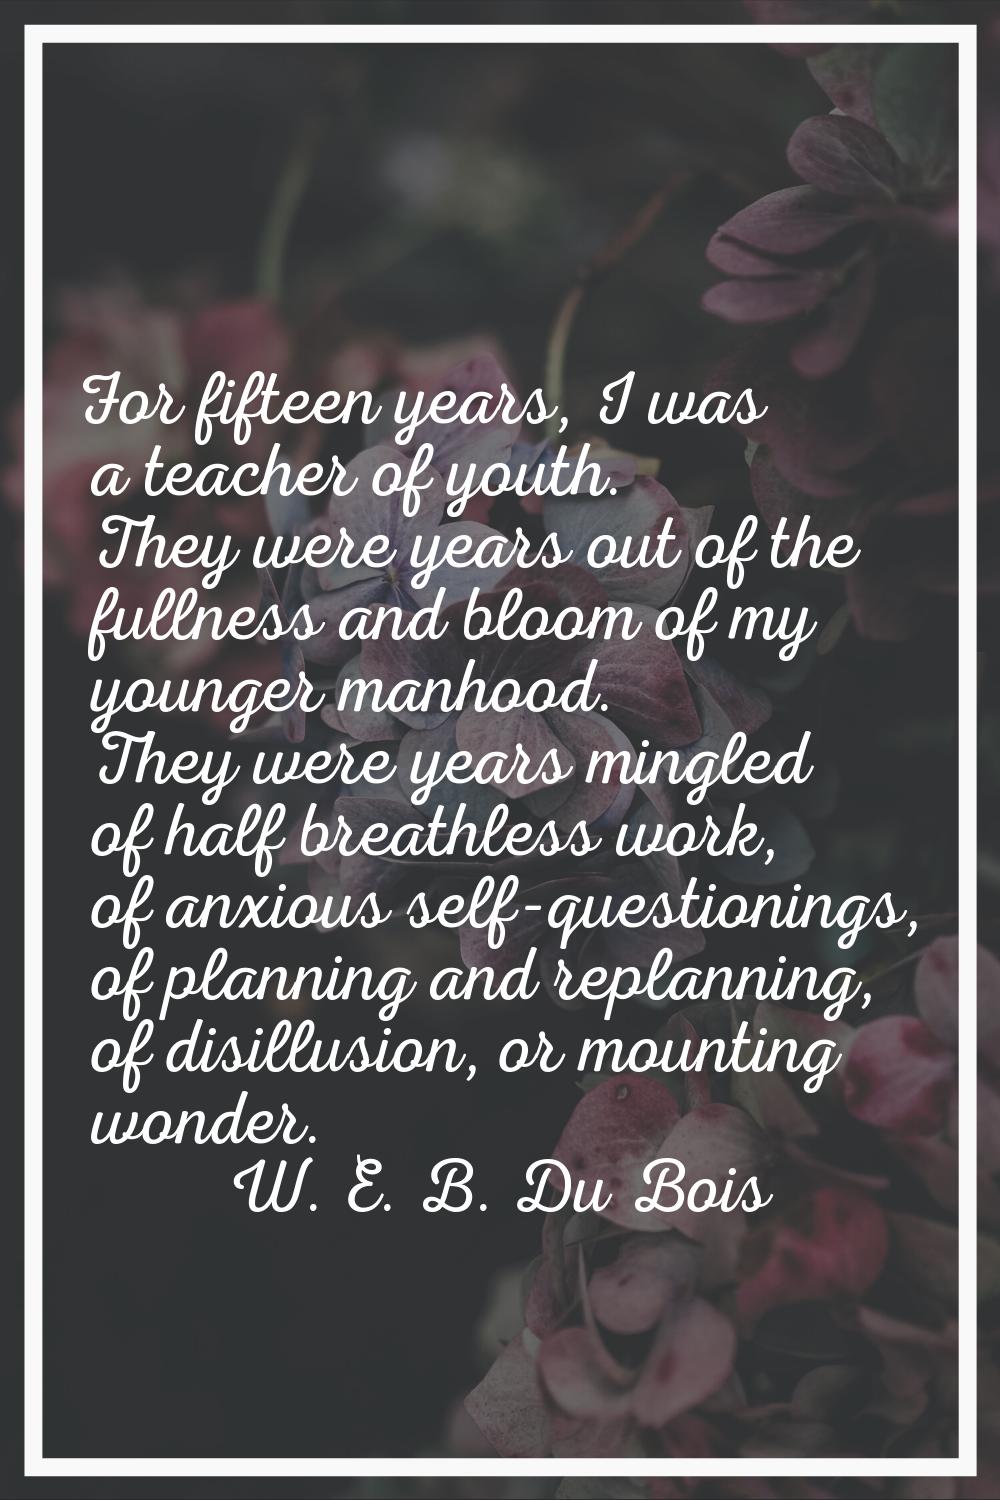 For fifteen years, I was a teacher of youth. They were years out of the fullness and bloom of my yo